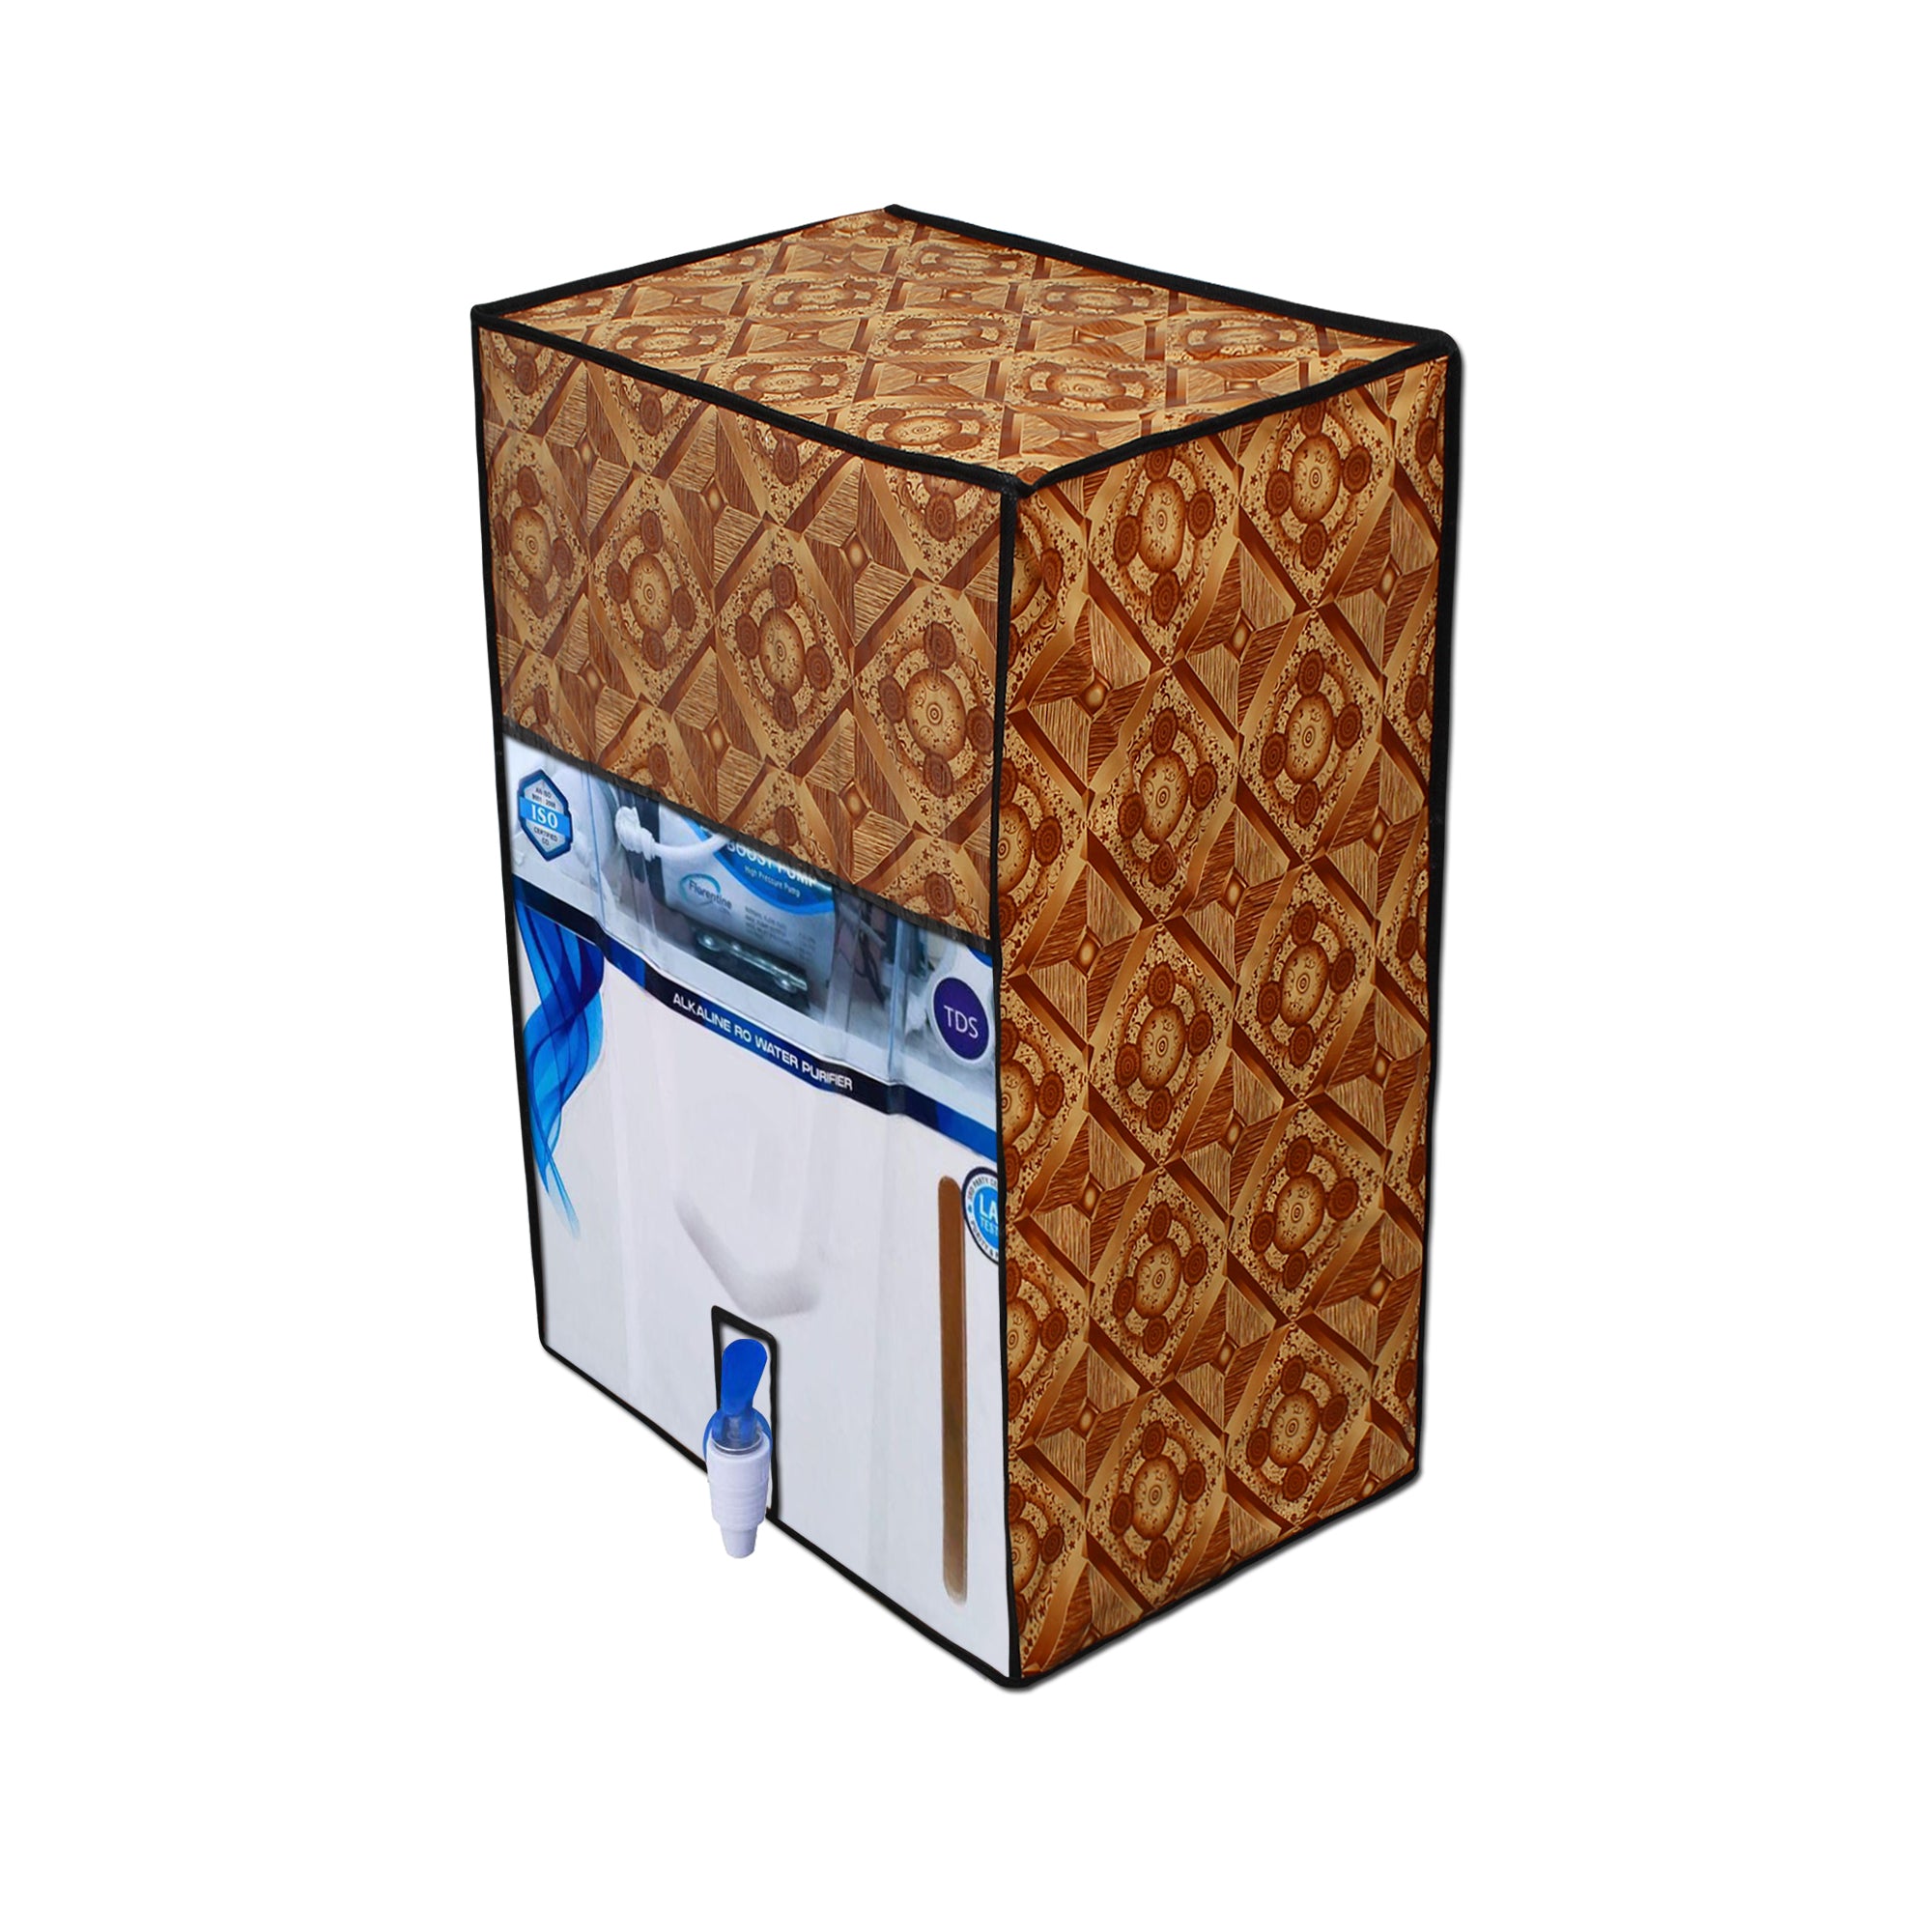 Waterproof & Dustproof Water Purifier RO Cover, SA54 - Dream Care Furnishings Private Limited